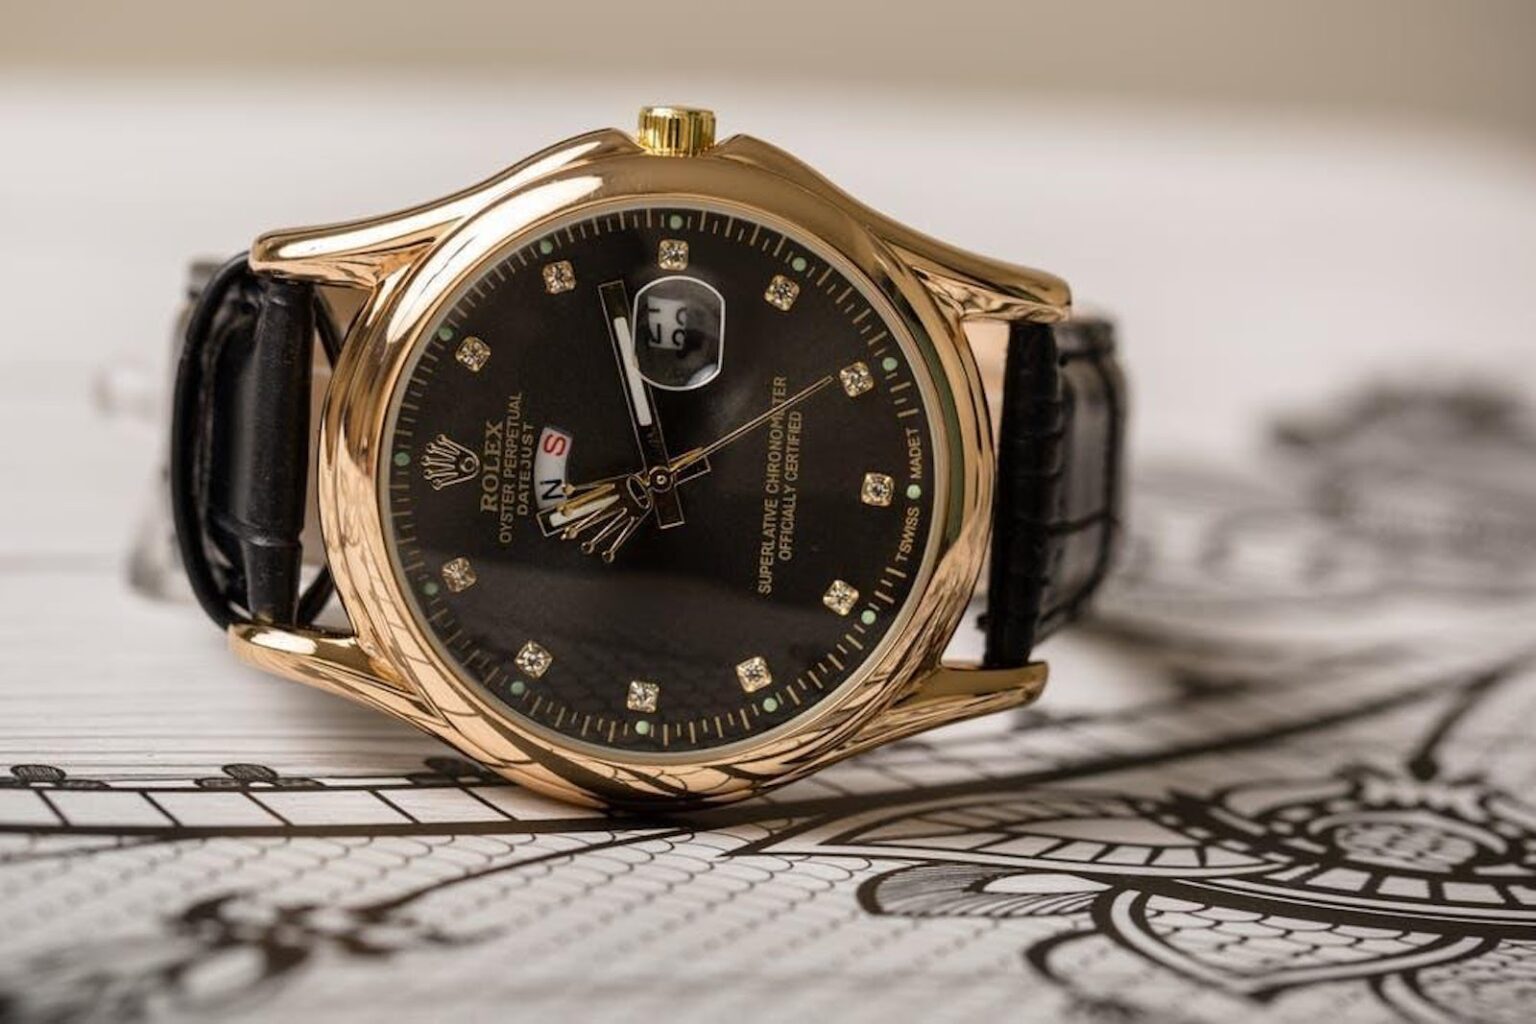 A Rolex is not just any watch, it is a status symbol, a prestige item; a beautiful piece of craftsmanship. Yet, is there a right way to wear them?